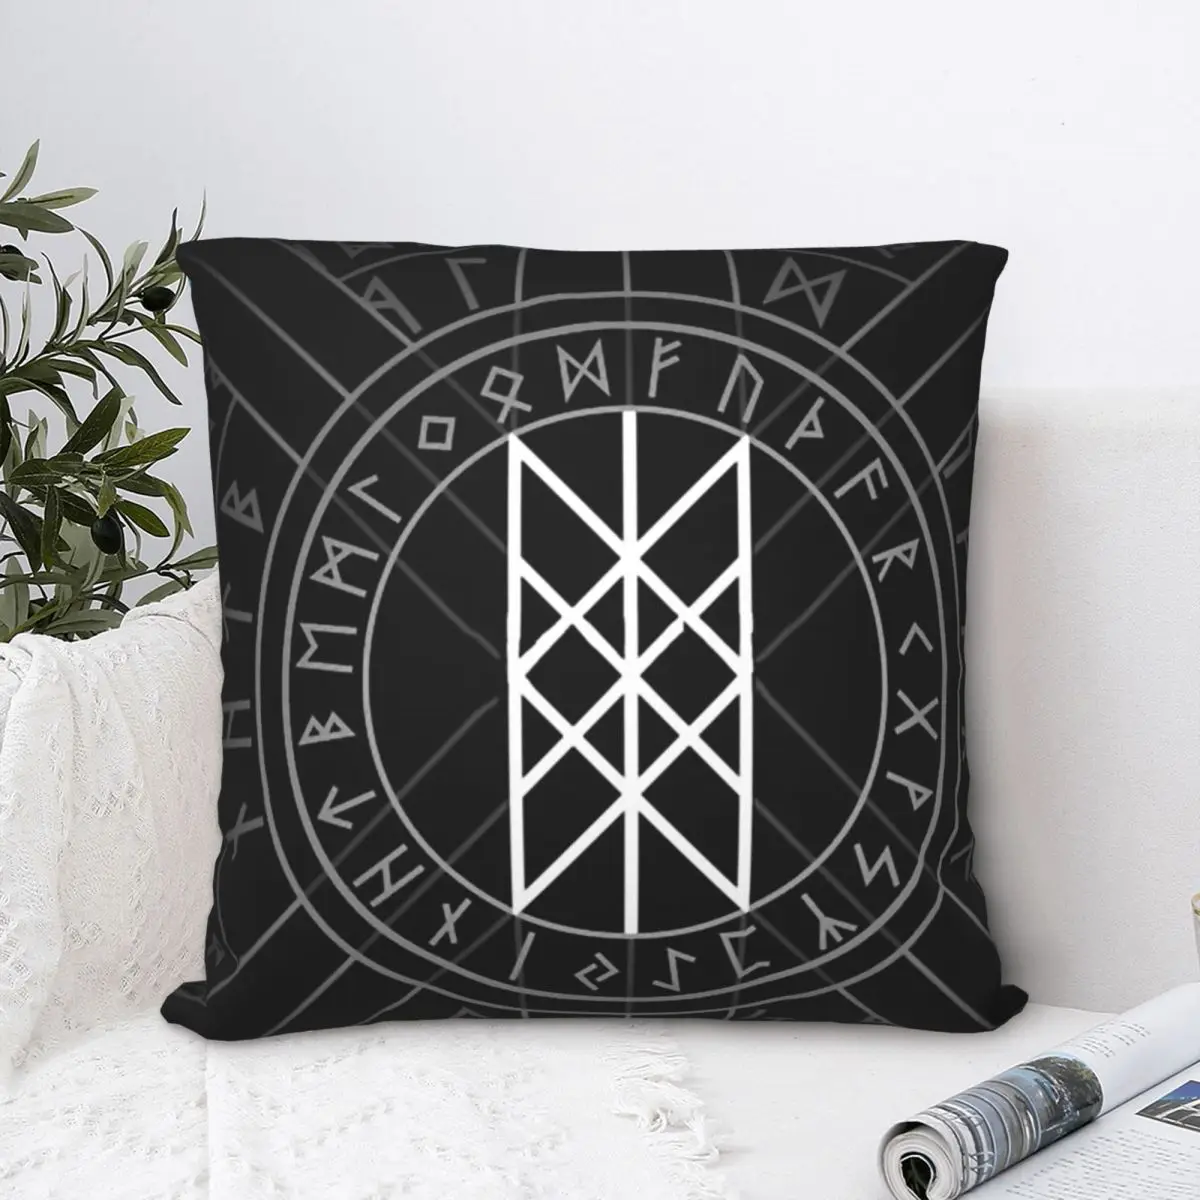 Web Of Wyrd The Matrix Of Fate Pillowcase Viking Norse Mythology Backpack Cushion For Livingroom Throw Pillow Case Decorative